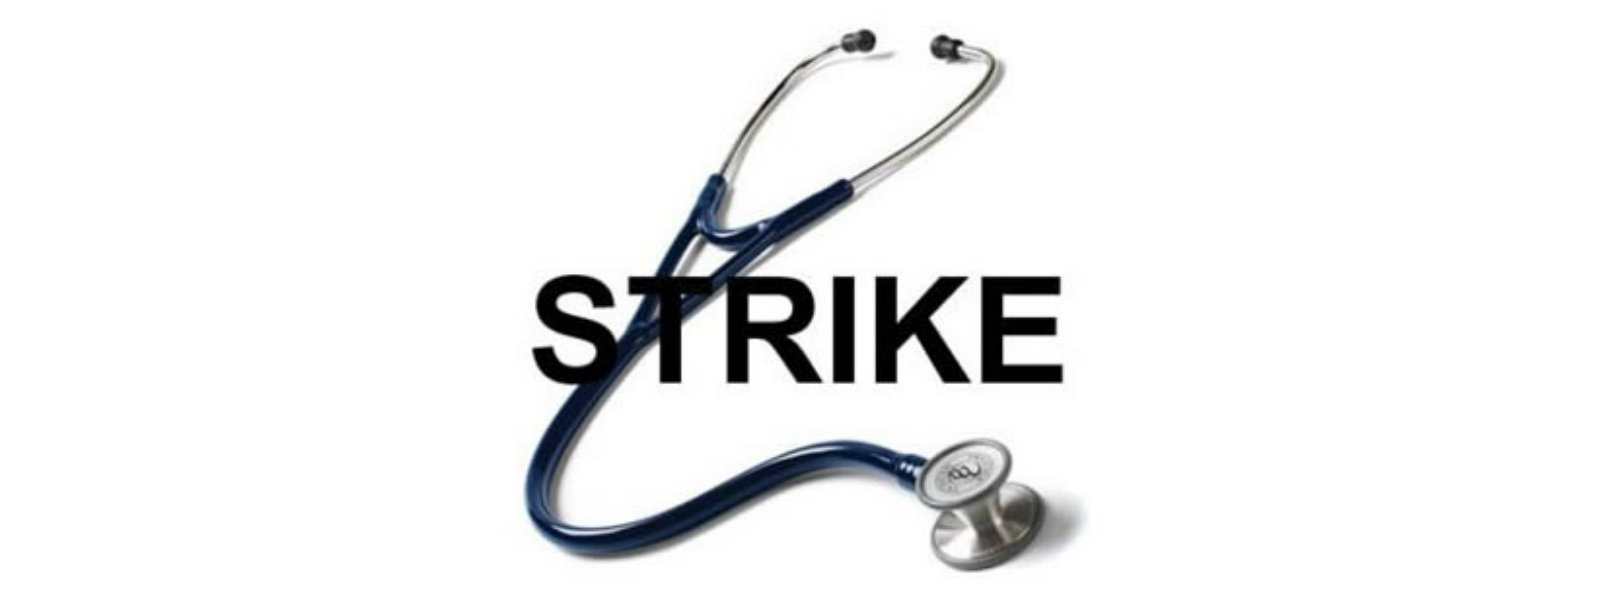 GMOA strike, helpless people all over hospitals